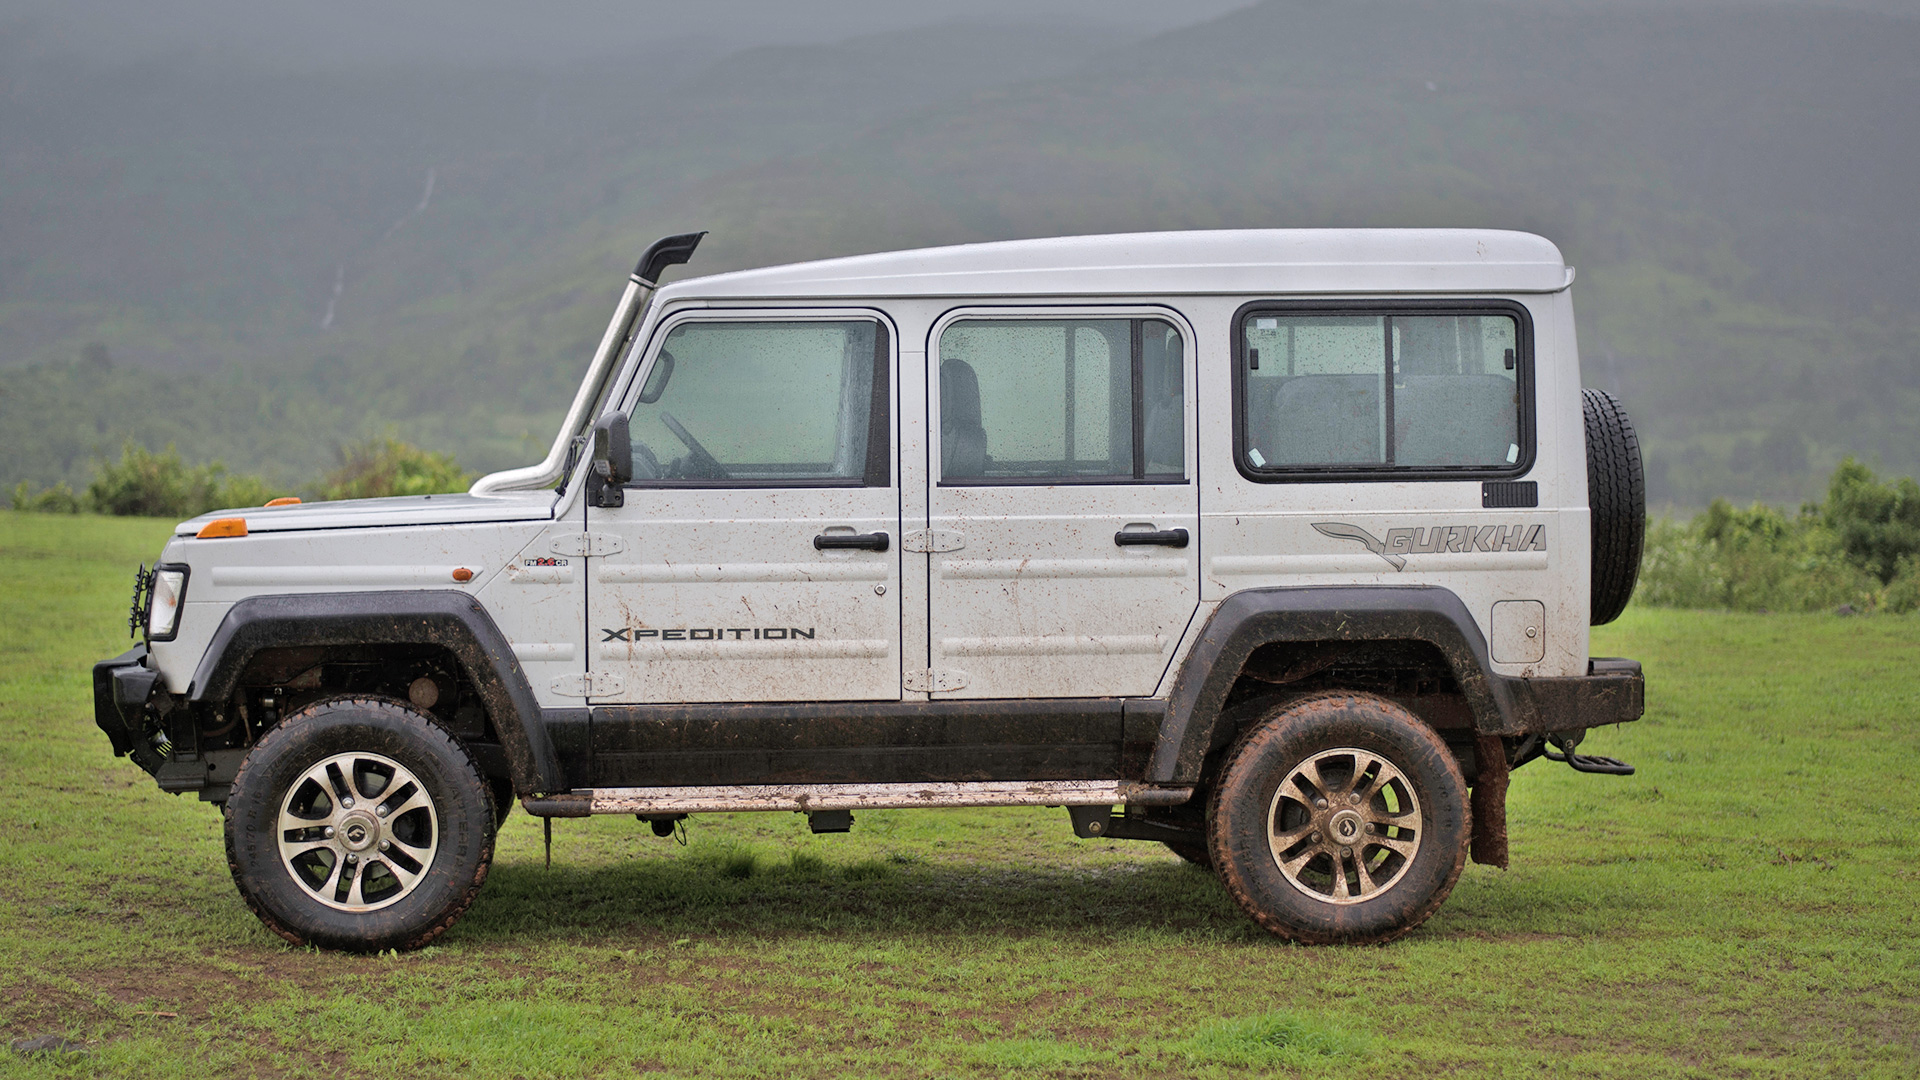 Force Gurkha 2019 Xpedition 5 Door Price Mileage Reviews